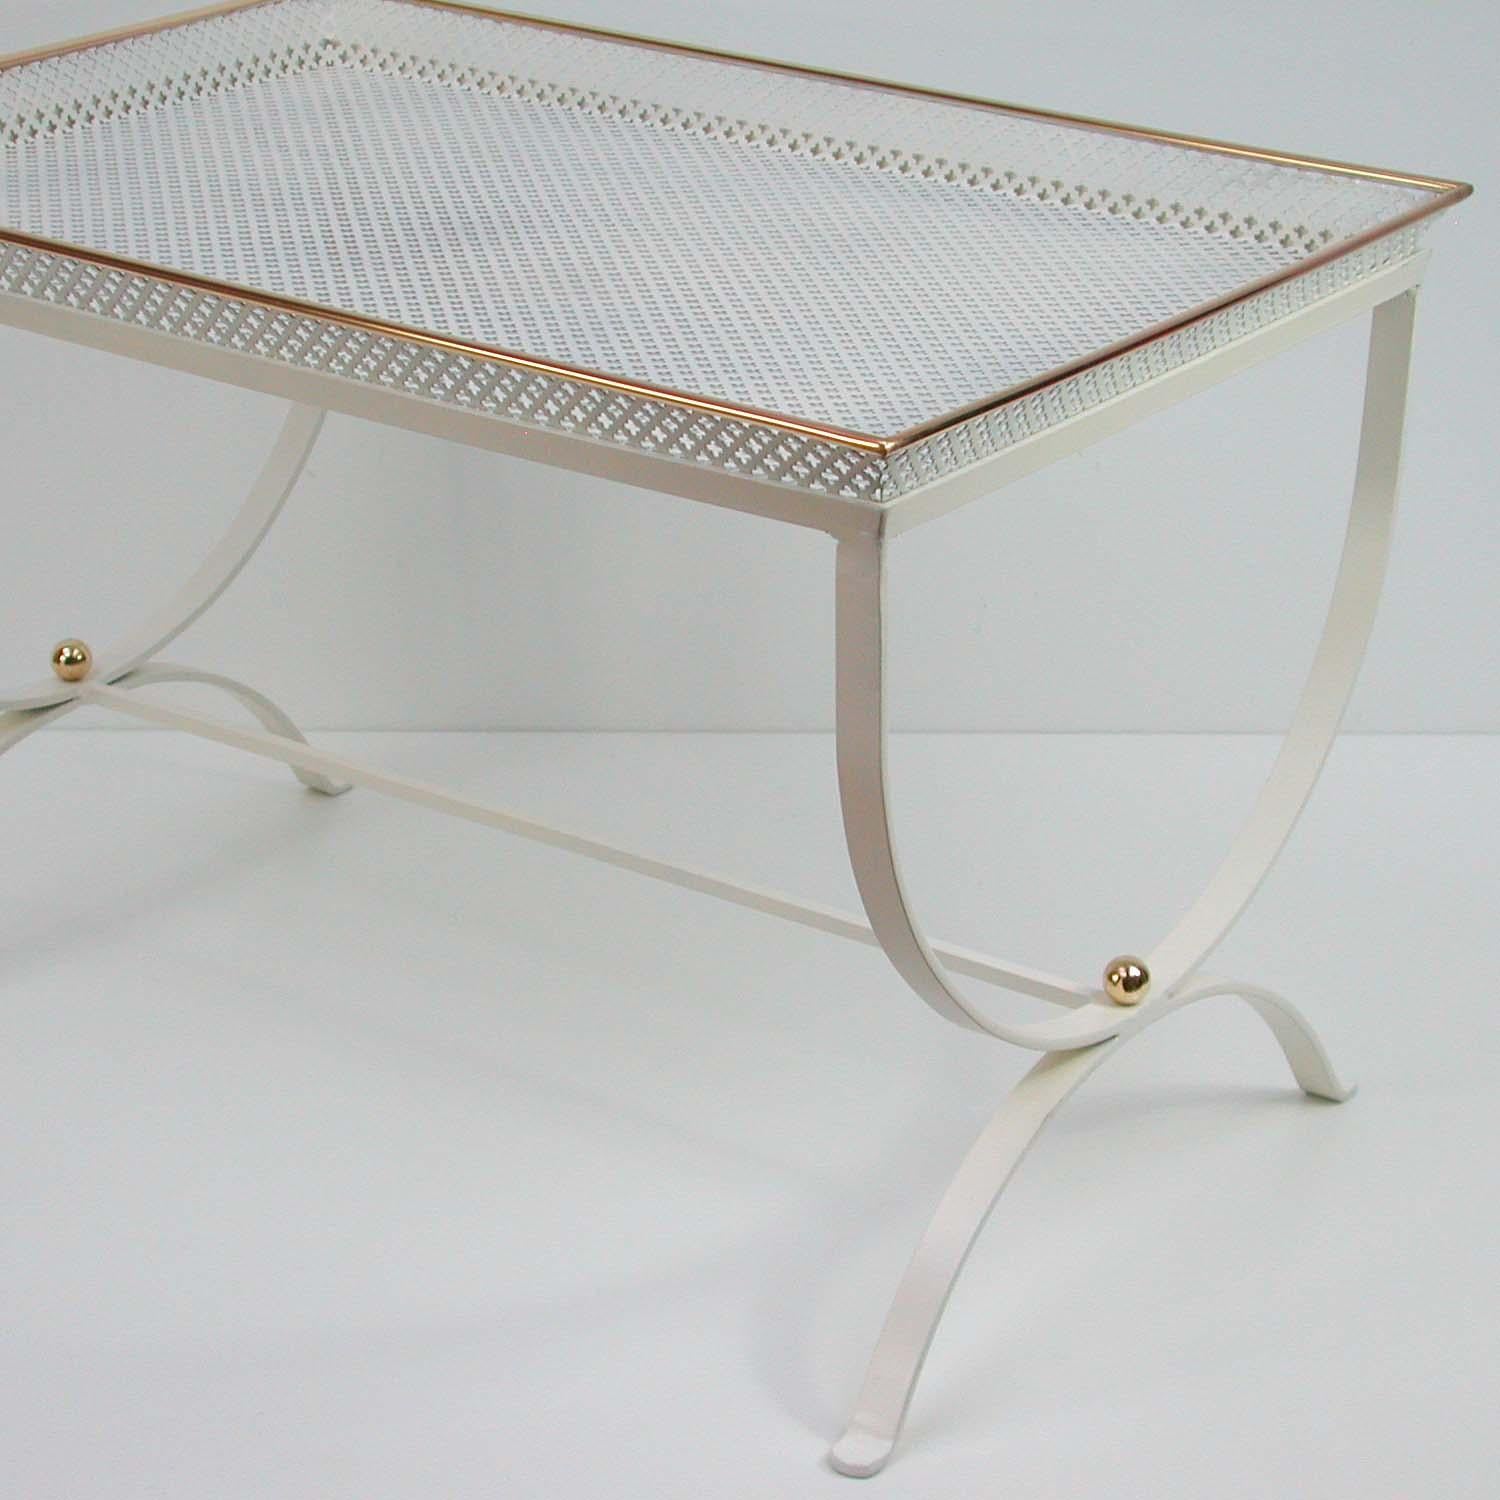 This 'Snow White' side table was designed and manufactured in France in the 1950s. It is made of white lacquered perforated metal and brass details in the manner of Mathieu Matégot.